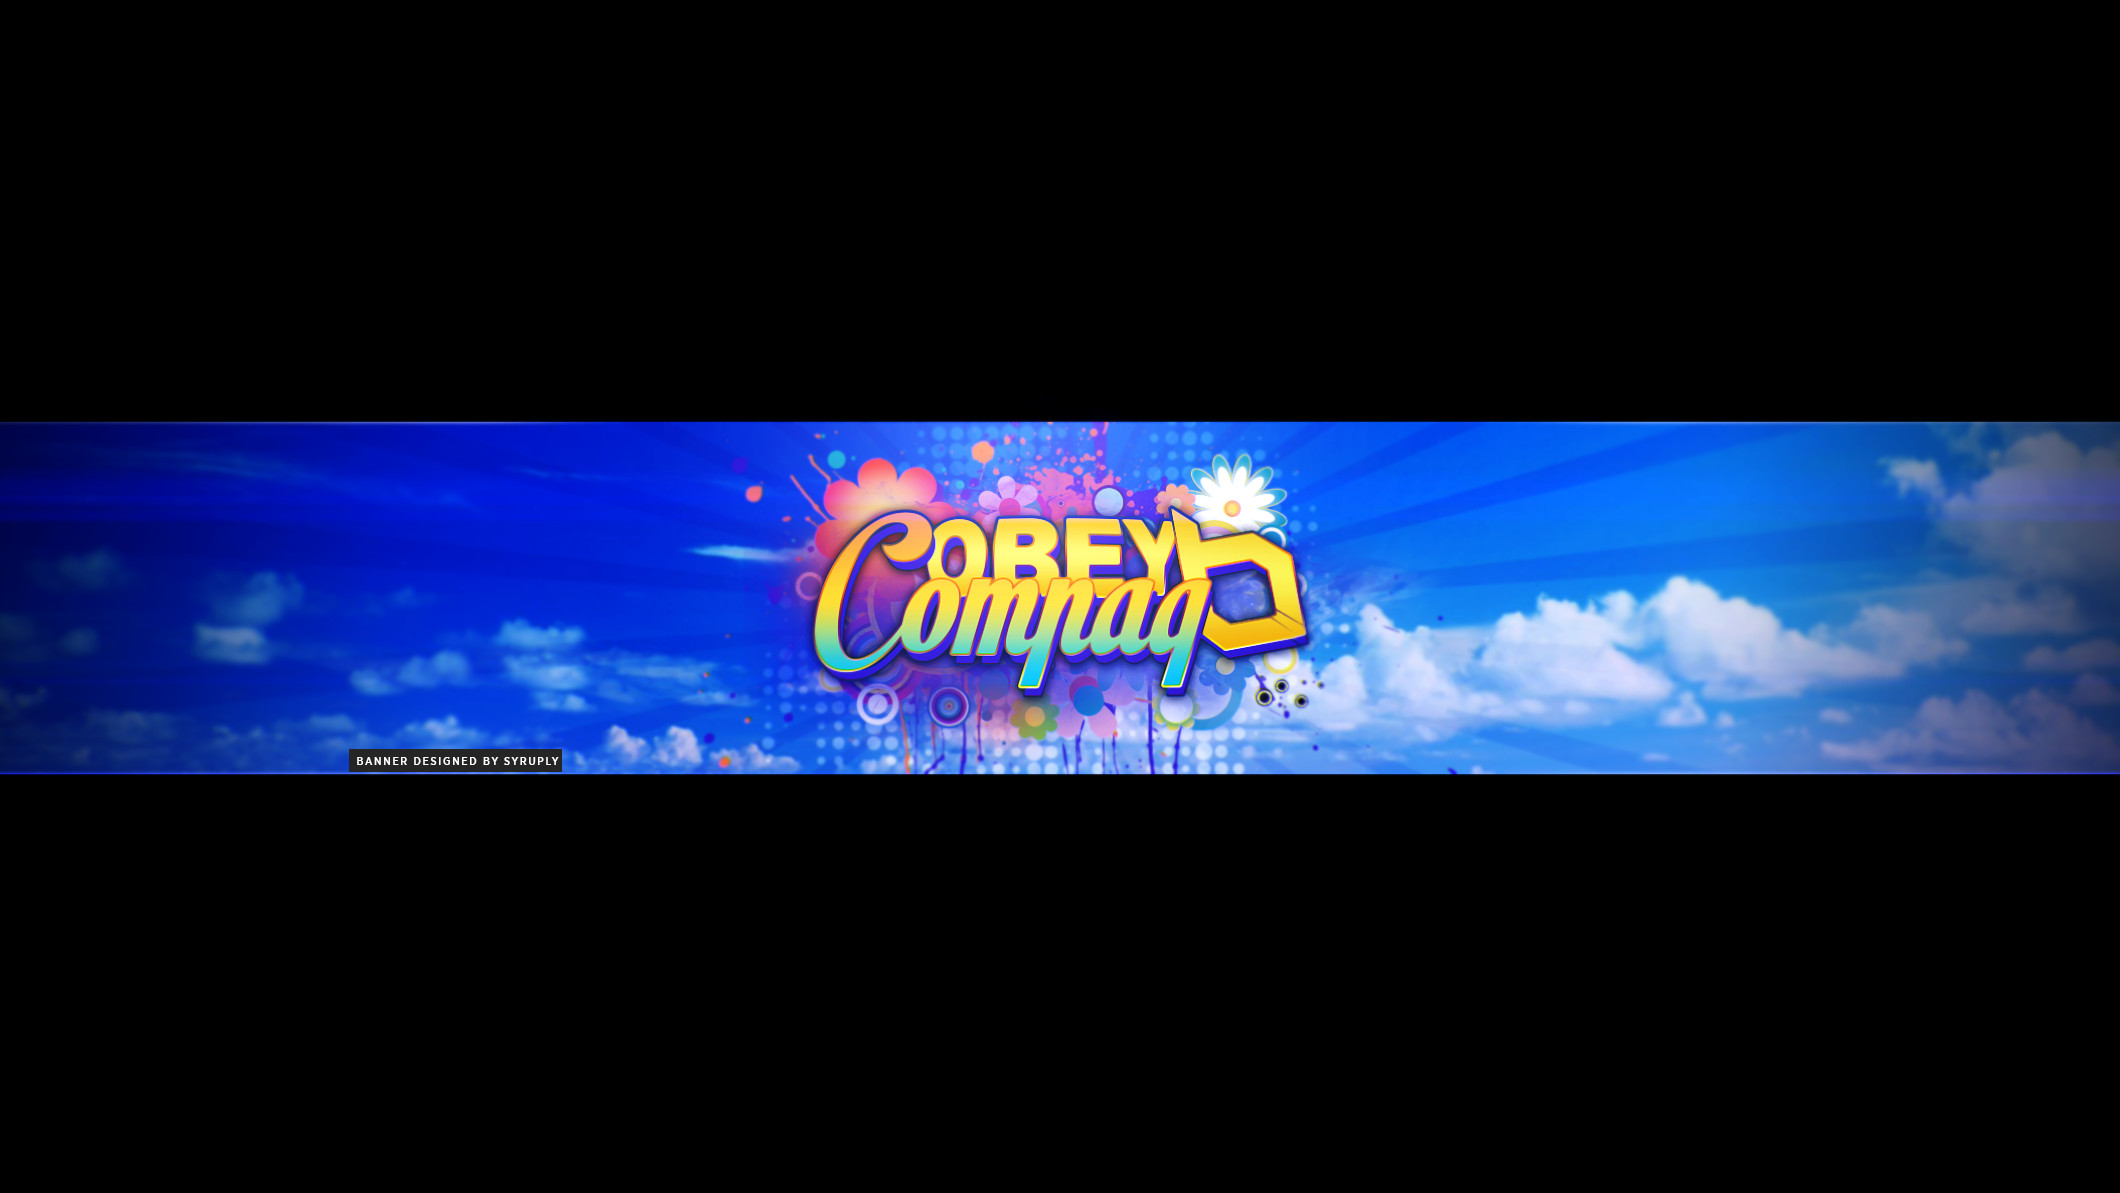 2120x1193 Obey Compaq YouTube Banner by Syruply Obey Compaq YouTube Banner by Syruply